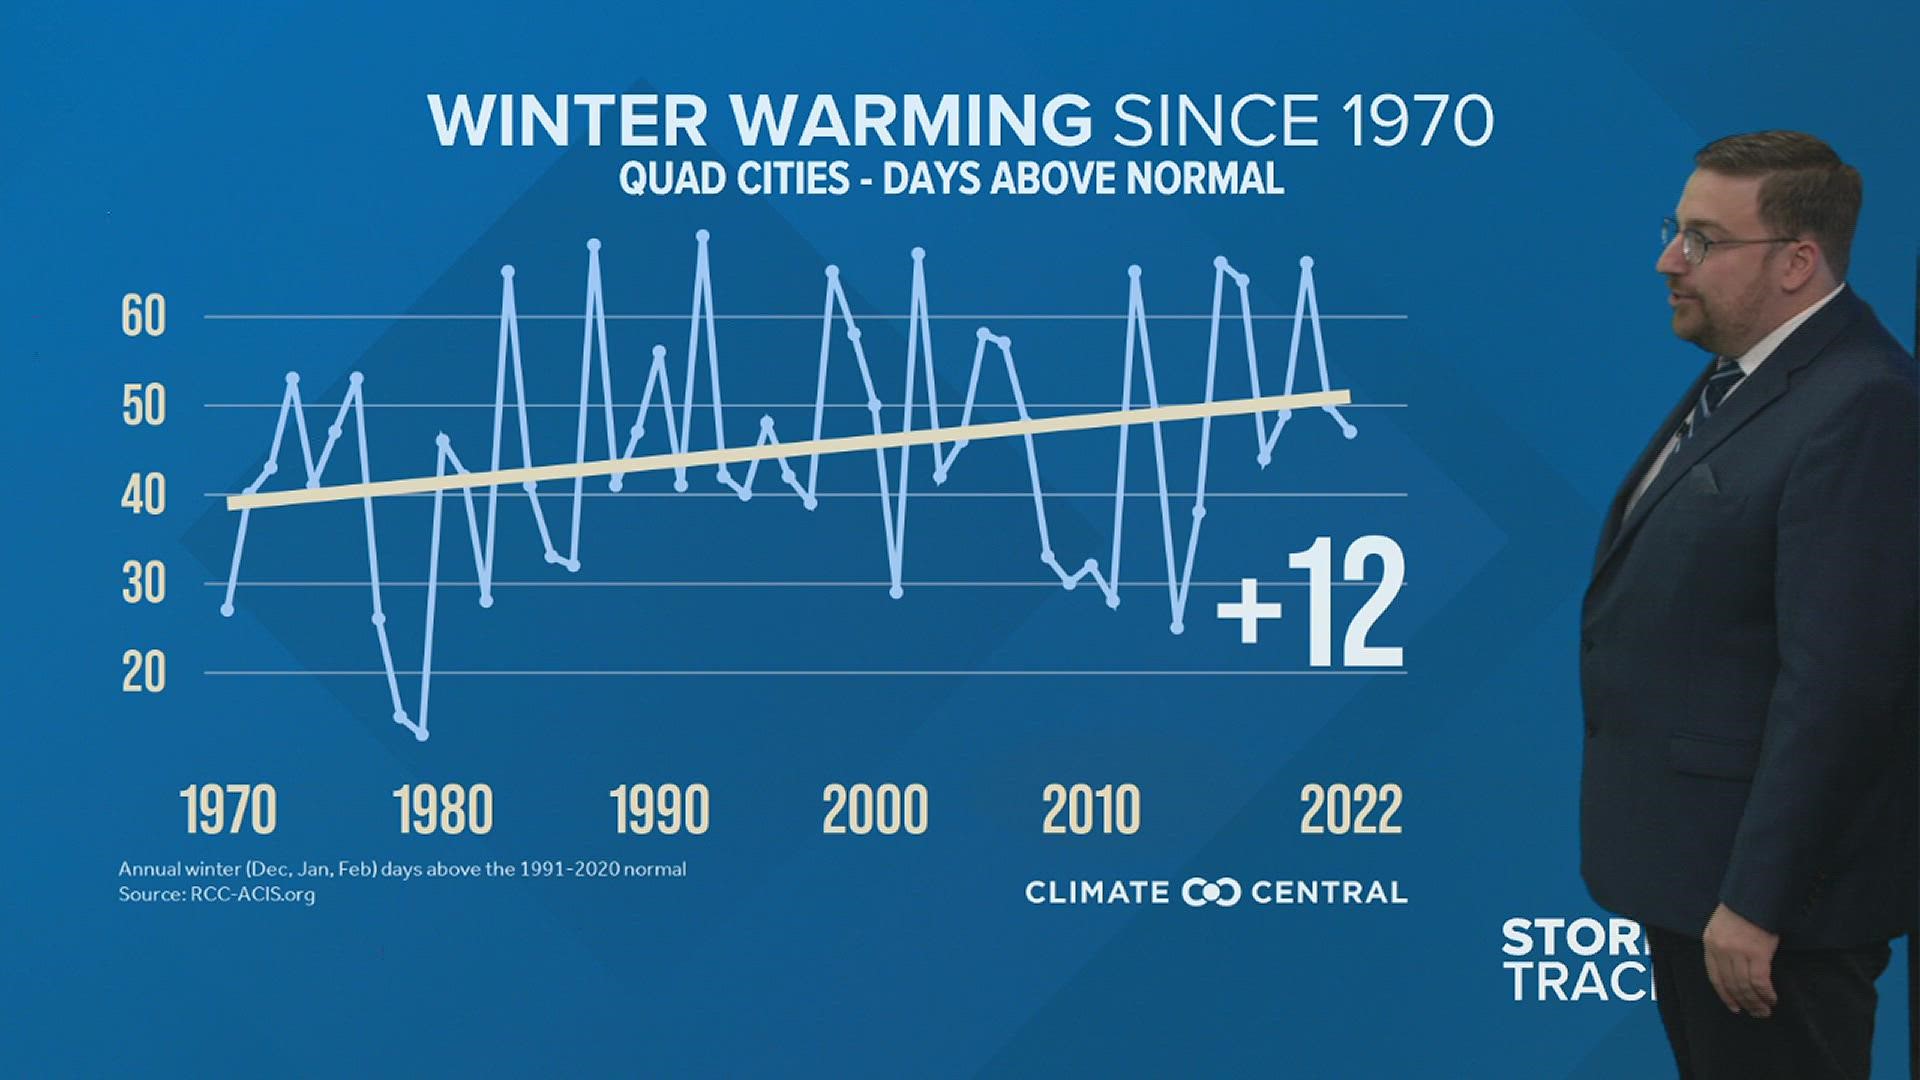 Paul from Cambridge, Illinois asks if winters are getting warmer in the Quad Cities.